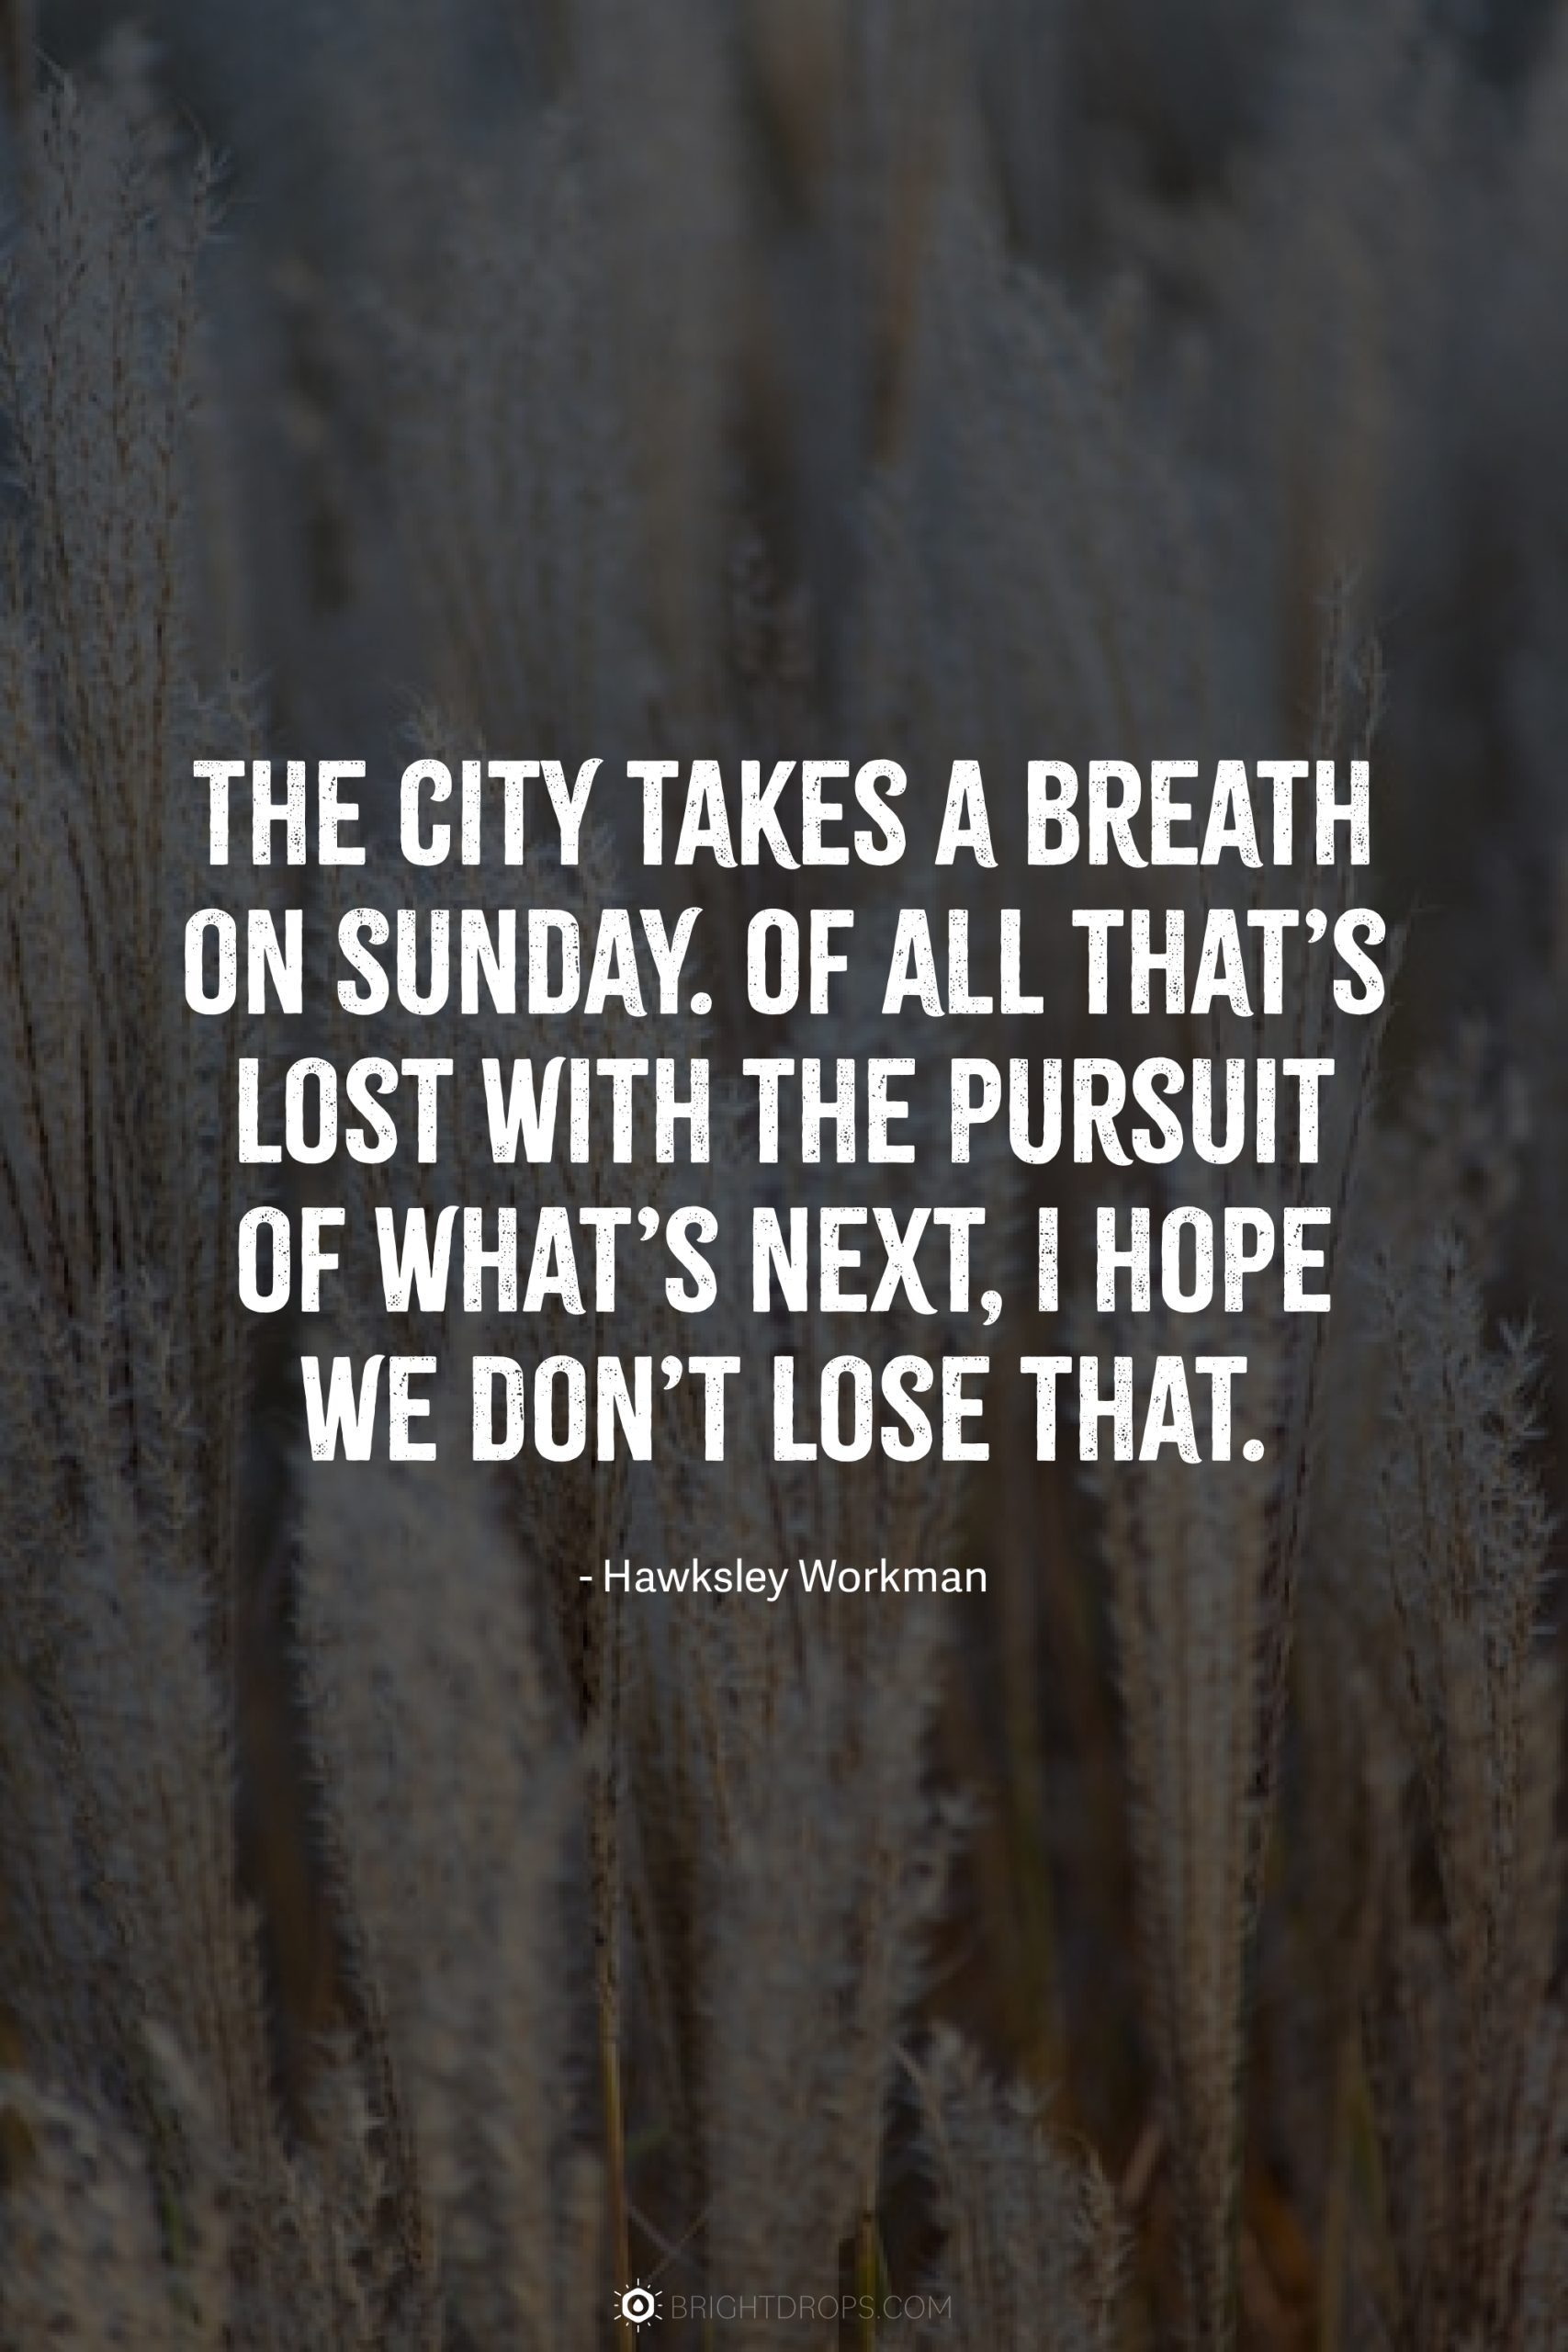 The city takes a breath on Sunday. Of all that’s lost with the pursuit of what’s next, I hope we don’t lose that.